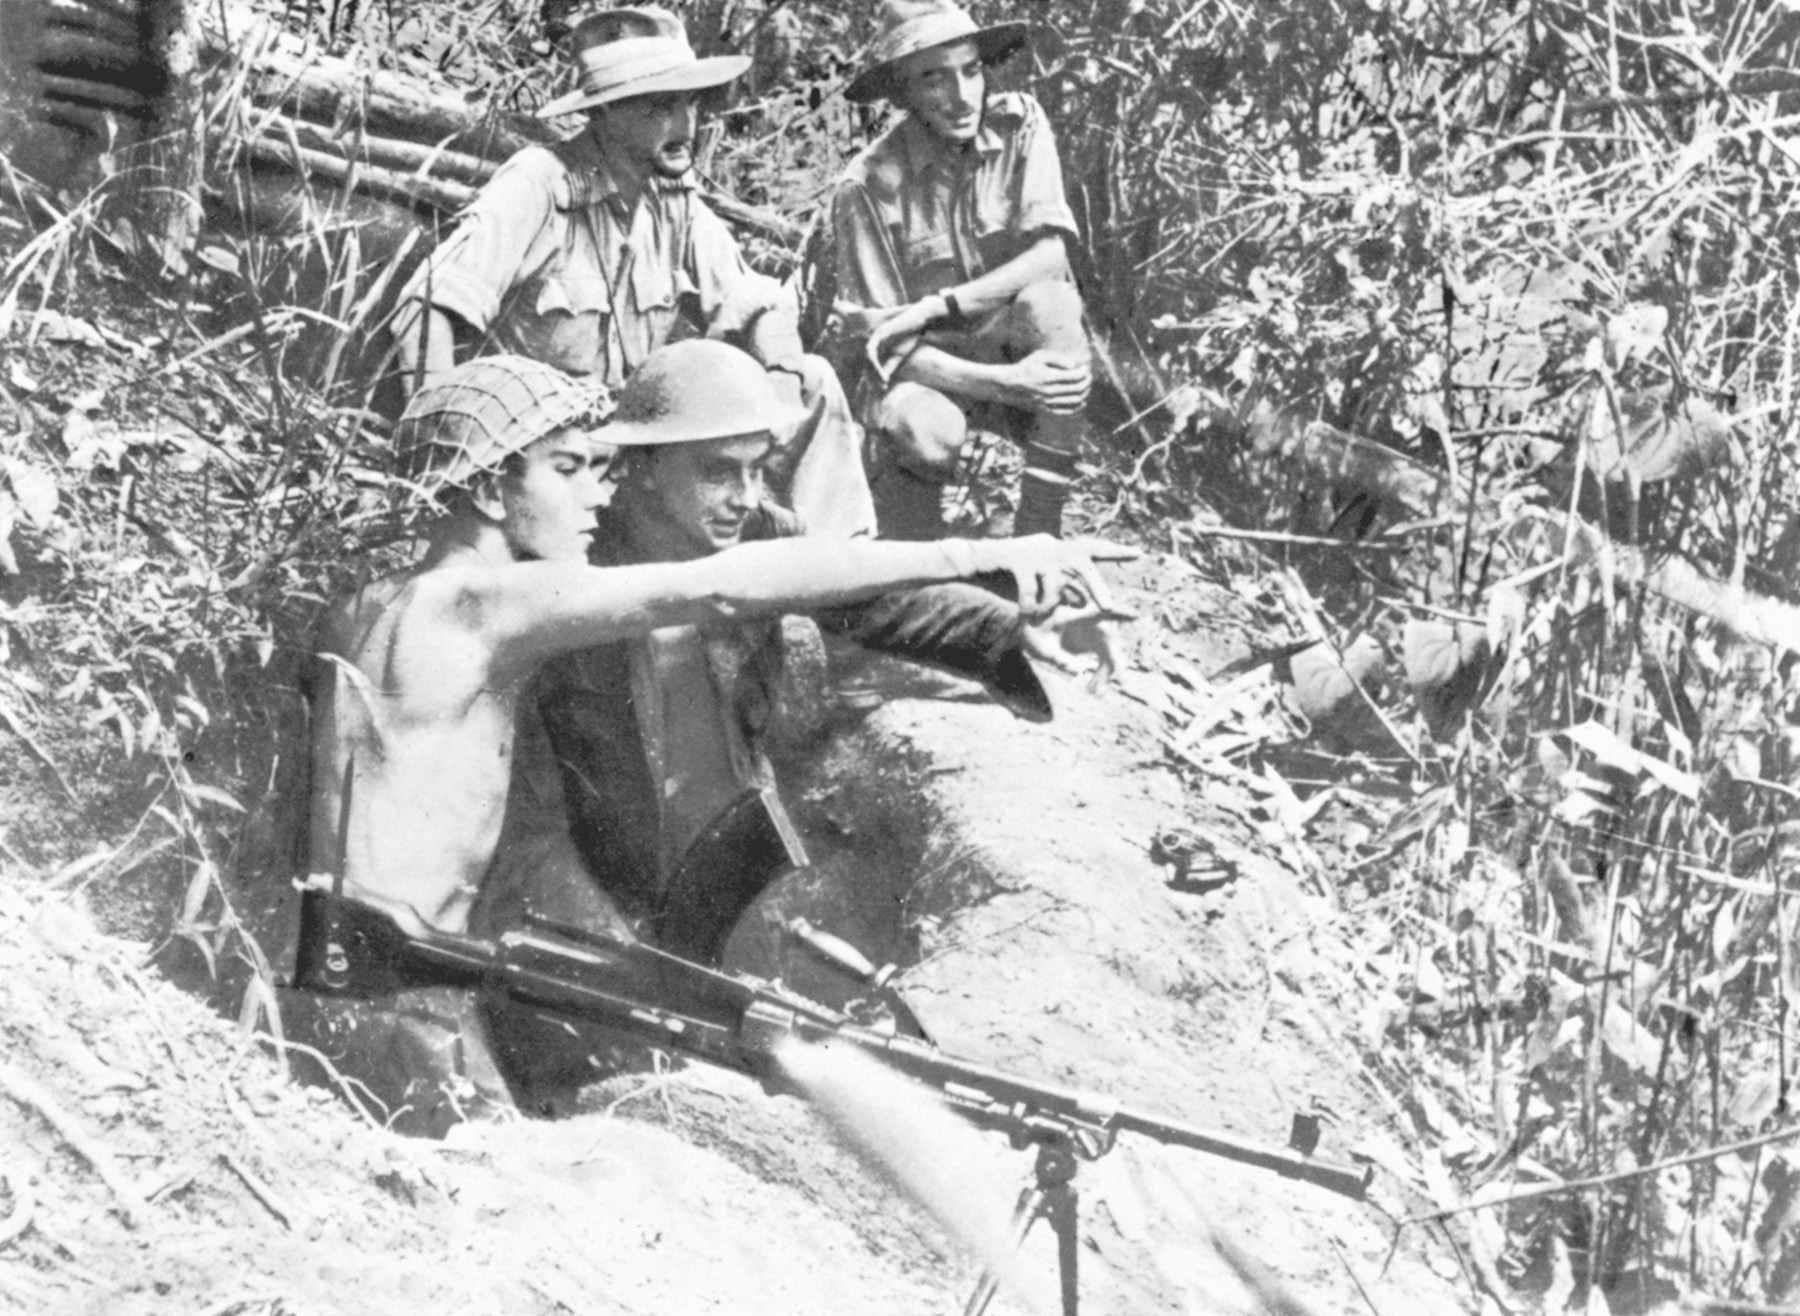 Positioned to command the high ground above an airfield in the Imphal Valley, a Bren gun team of RAF personnel spots movement in the distant jungle. 